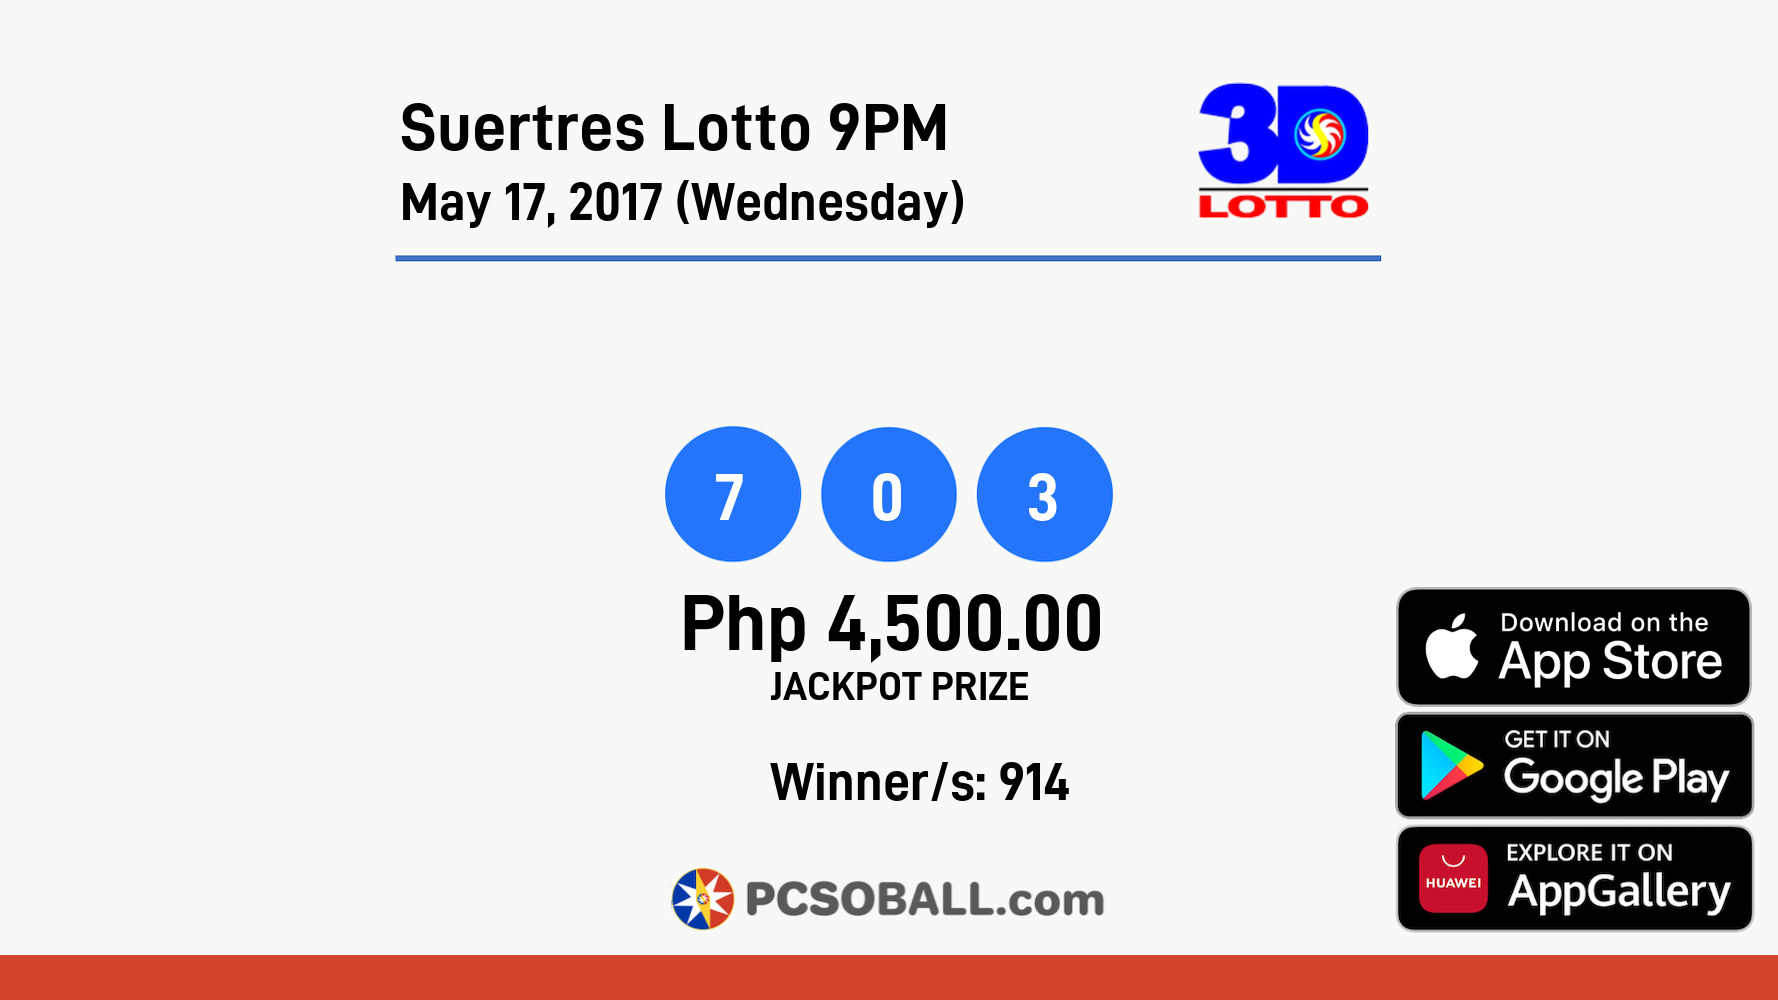 Suertres Lotto 9PM May 17, 2017 (Wednesday) Result